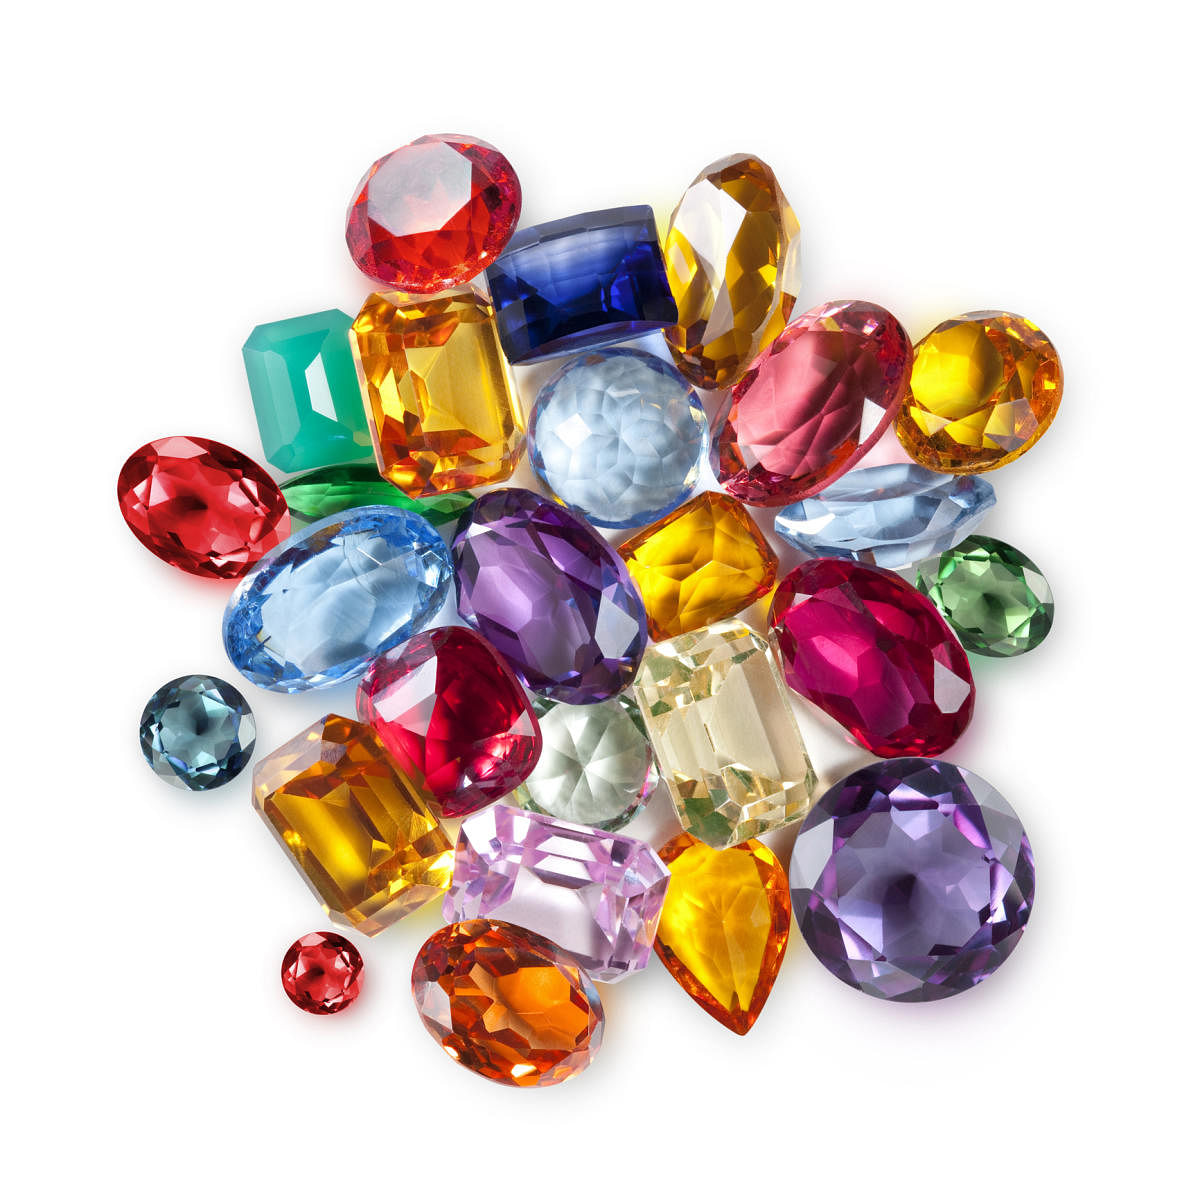 These days, it has become increasingly difficult to distinguish the original gem from a synthetic or an imitation.